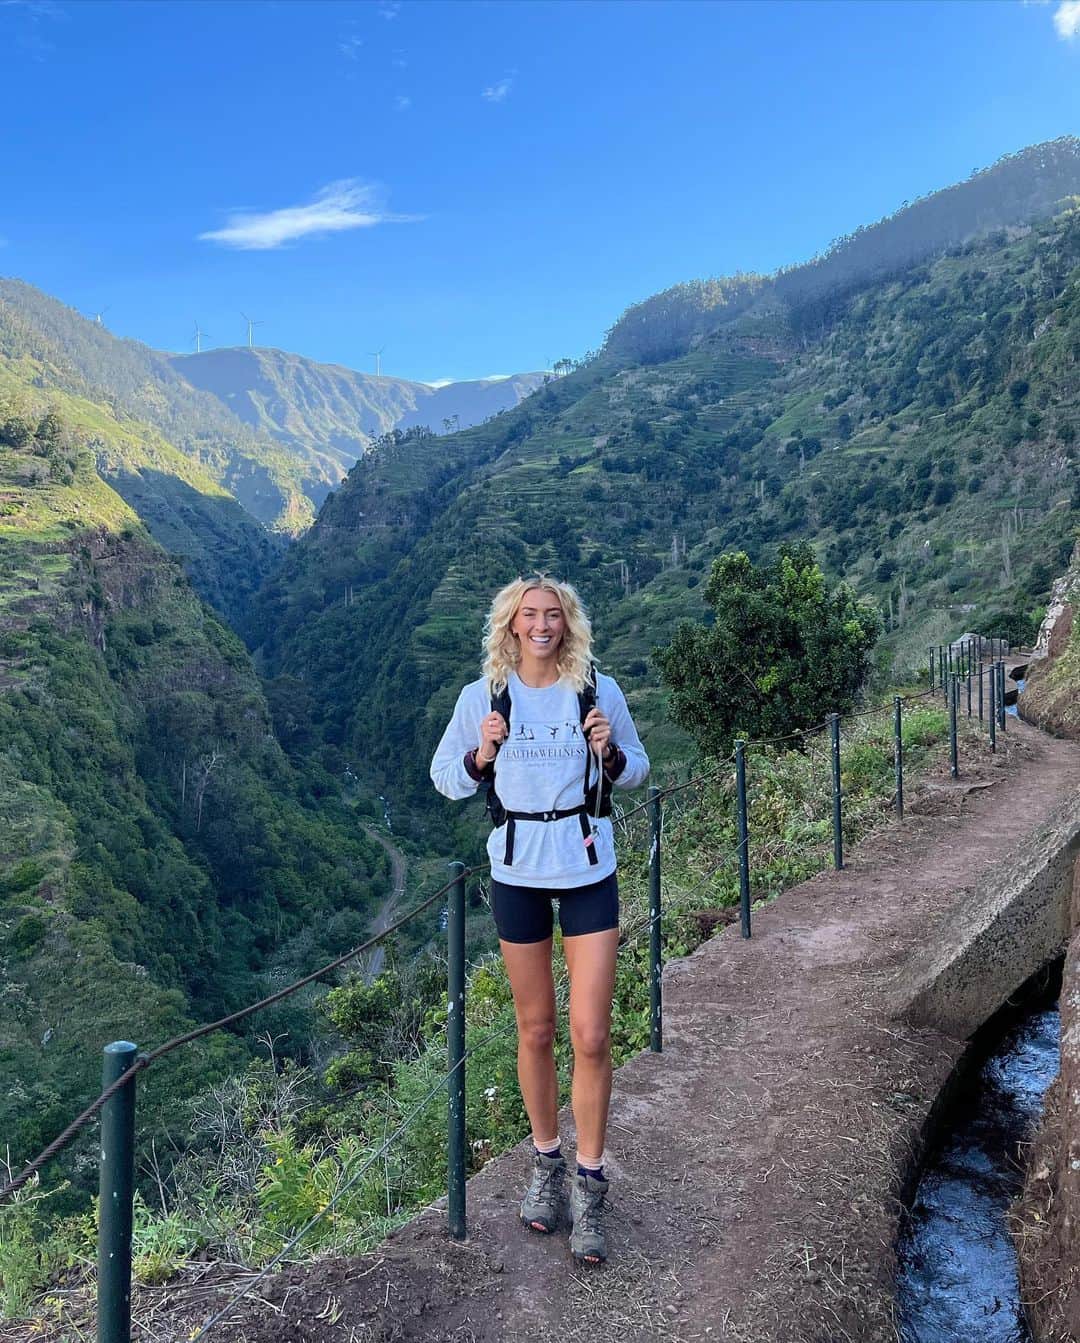 Zanna Van Dijkのインスタグラム：「COME HIKE PERU WITH ME 🇵🇪  EDIT: SOLD OUT! In 8 minutes. Fastest sell out tour ever guys. Please email if you wanna be added to the waitlist. Thank you, thank you, thank you! Plenty more adventures to come! 🙏🏼  Spaces are now available for my next 2024 group hiking trip! Here’s all the deets:  ➡️ When? May 19-28th 2024  ➡️ What? An immersive once in a lifetime adventure through the dramatic landscapes of Peru. We will be completing the iconic Inca Trail, visiting multicoloured "rainbow mountains", paddle boarding on remote mirror lakes and connecting with small local communities.   ➡️ What will we see? Highlights include: ✨ Trek the iconic Inca Trail over four days, ending with a sunrise hike to Machu Picchu, the breathtaking lost city. ✨ Visit the beautiful Palcoyo community which is home to the famous multicolour "rainbow mountains".  ✨ Immerse yourself in the bustling cities of Lima and Cusco through private walking tours. ✨ Paddle board on a peaceful mirror lake off the beaten tourist track, right in the heart of the Andes. ✨ Explore the sacred valley, Wilcamayo, and connect with the local Ocotuan community who live there. ✨ Tour the Inca town of Ollantaytambo and experience its photogenic terraces. ✨ And so much more! This is a real bucket list trip!  ➡️ Price & booking? £2300 for 10 days. This includes all activities, internal flights, accomodation and many meals. It does not include international flights. Bookings can be made through my website shop, you can also find more info and the full detailed itinerary there ✅   ➡️ Anything else? Veggie and vegan options will be provided. Most guests come solo so don’t be afraid to travel alone. This is an intermediate trip. You’ll need a good base level of fitness for this adventure as on the trekking days we will be doing a significant amount of hiking. More FAQs are answered on my stories 🥾  I can’t wait to make memories with you! ♥️ (ad - my own retreat) #hikingretreat #grouphiking」